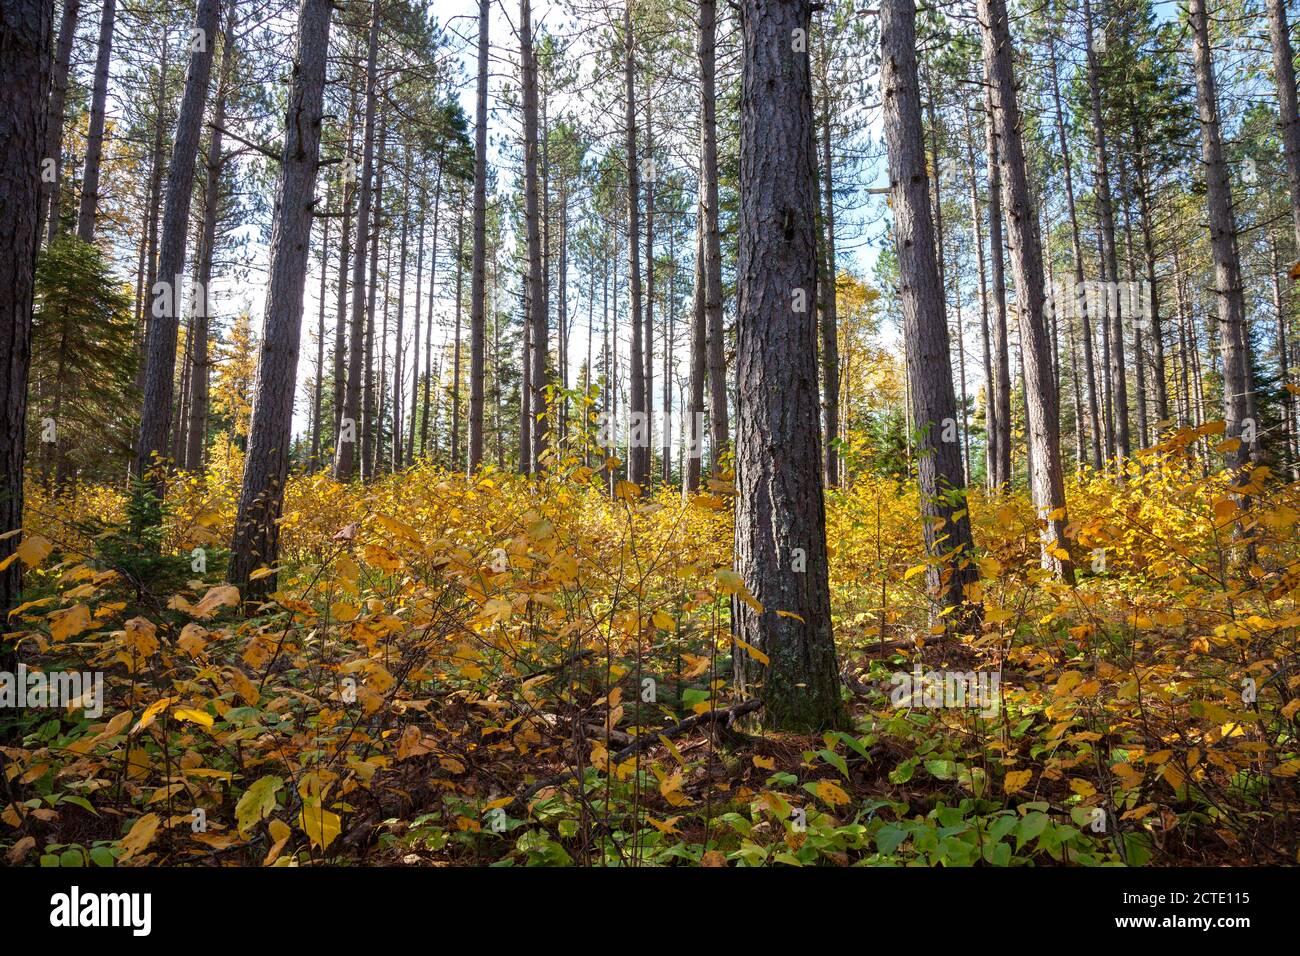 A stand of pines in filtered sunlight during autumn in northern Minnesota Stock Photo